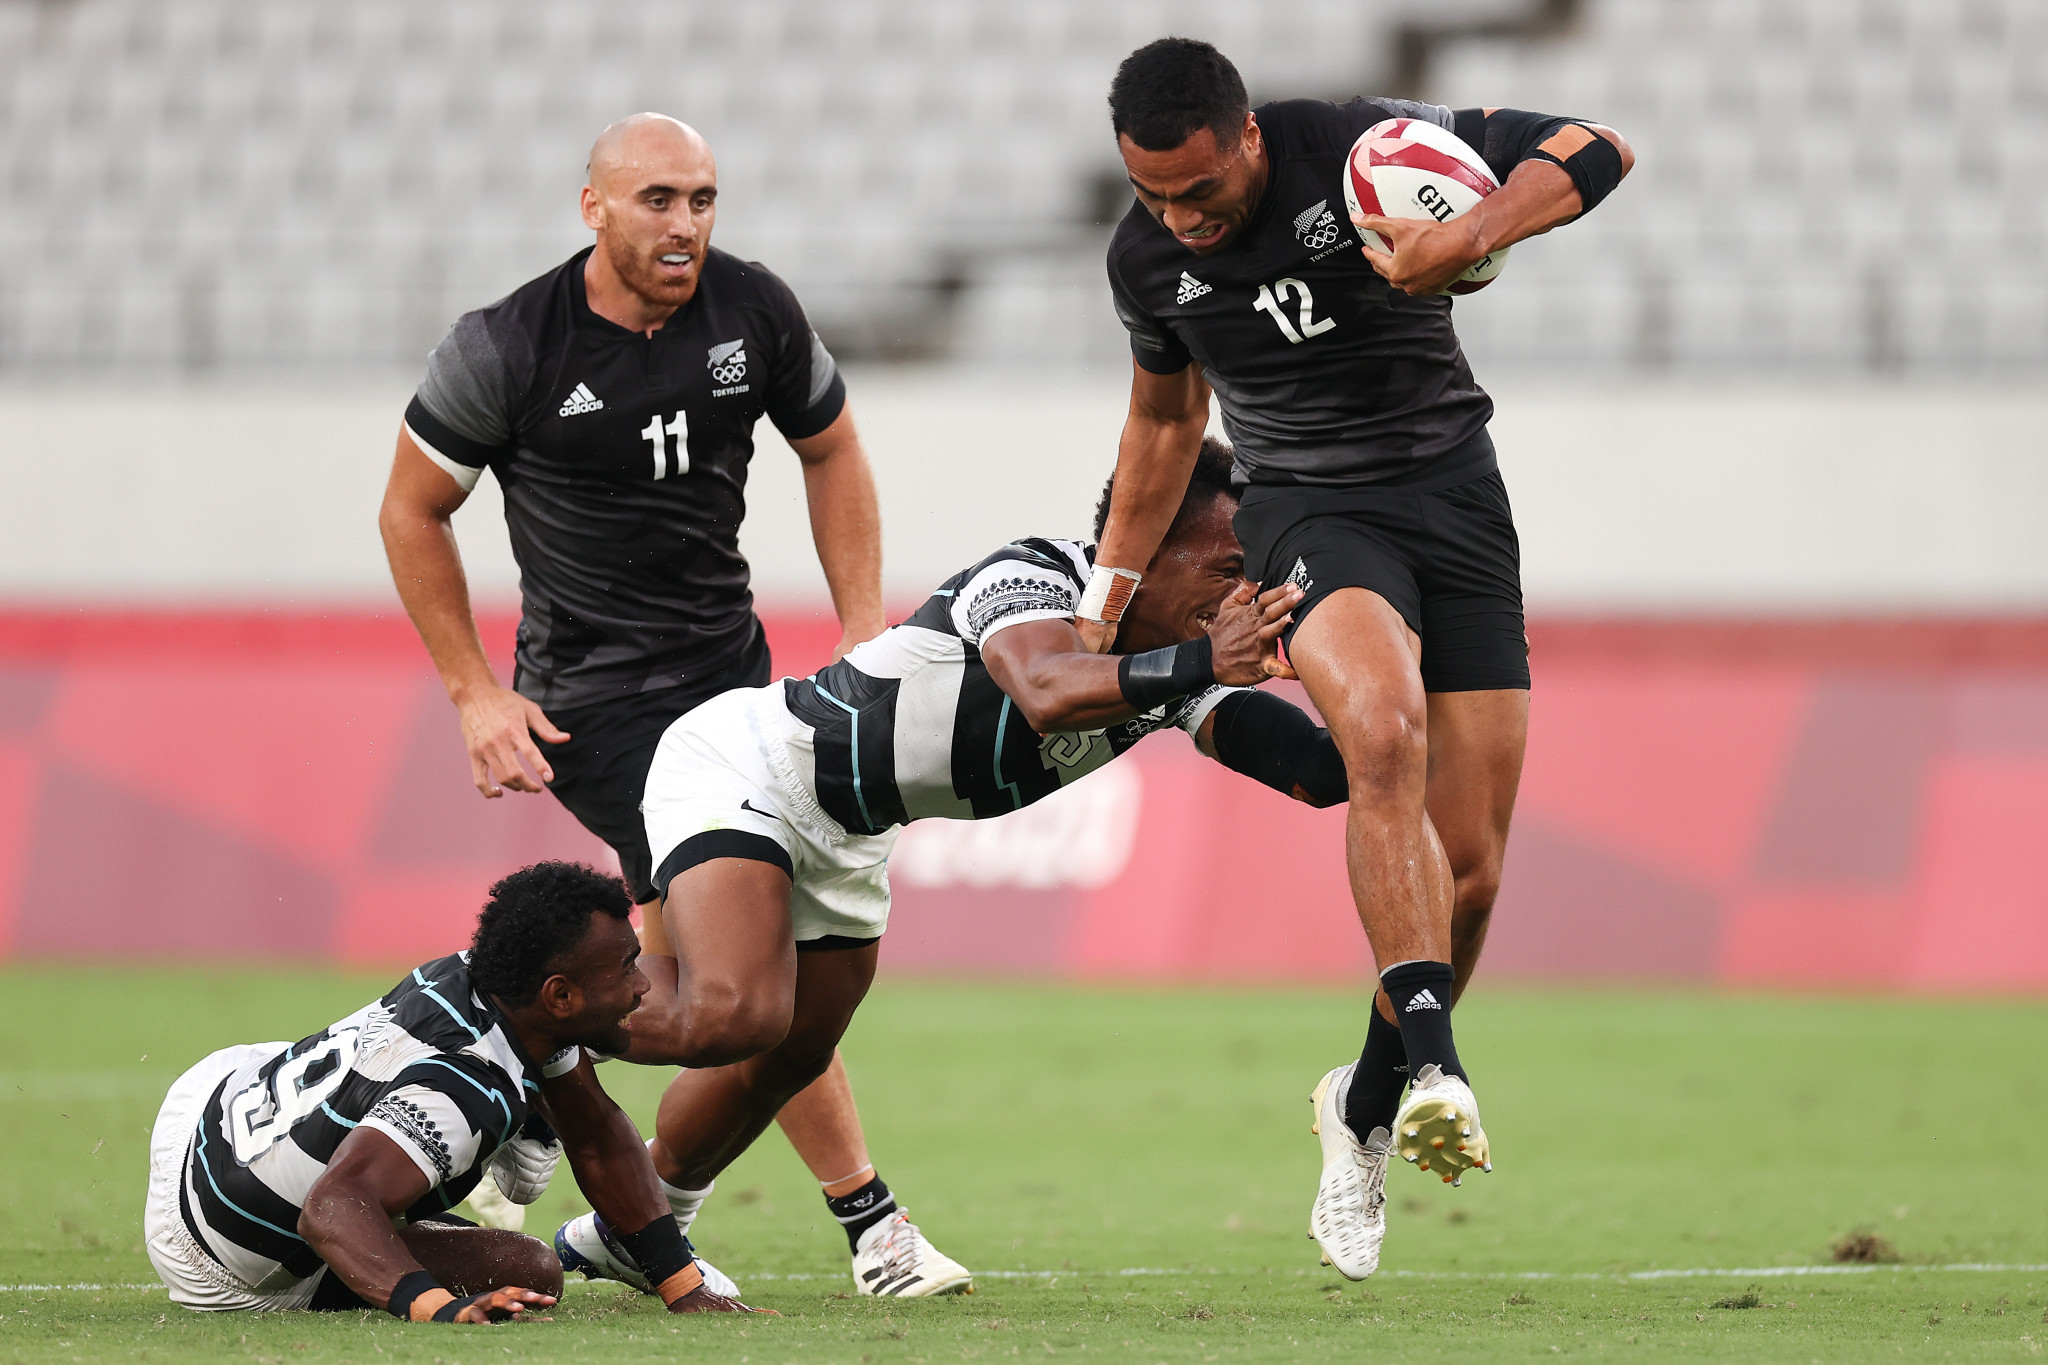 New Zealand’s men’s sevens rugby team are set to make their first appearance since losing to Fiji in the final of last year's Olympics in Tokyo ©Getty Images